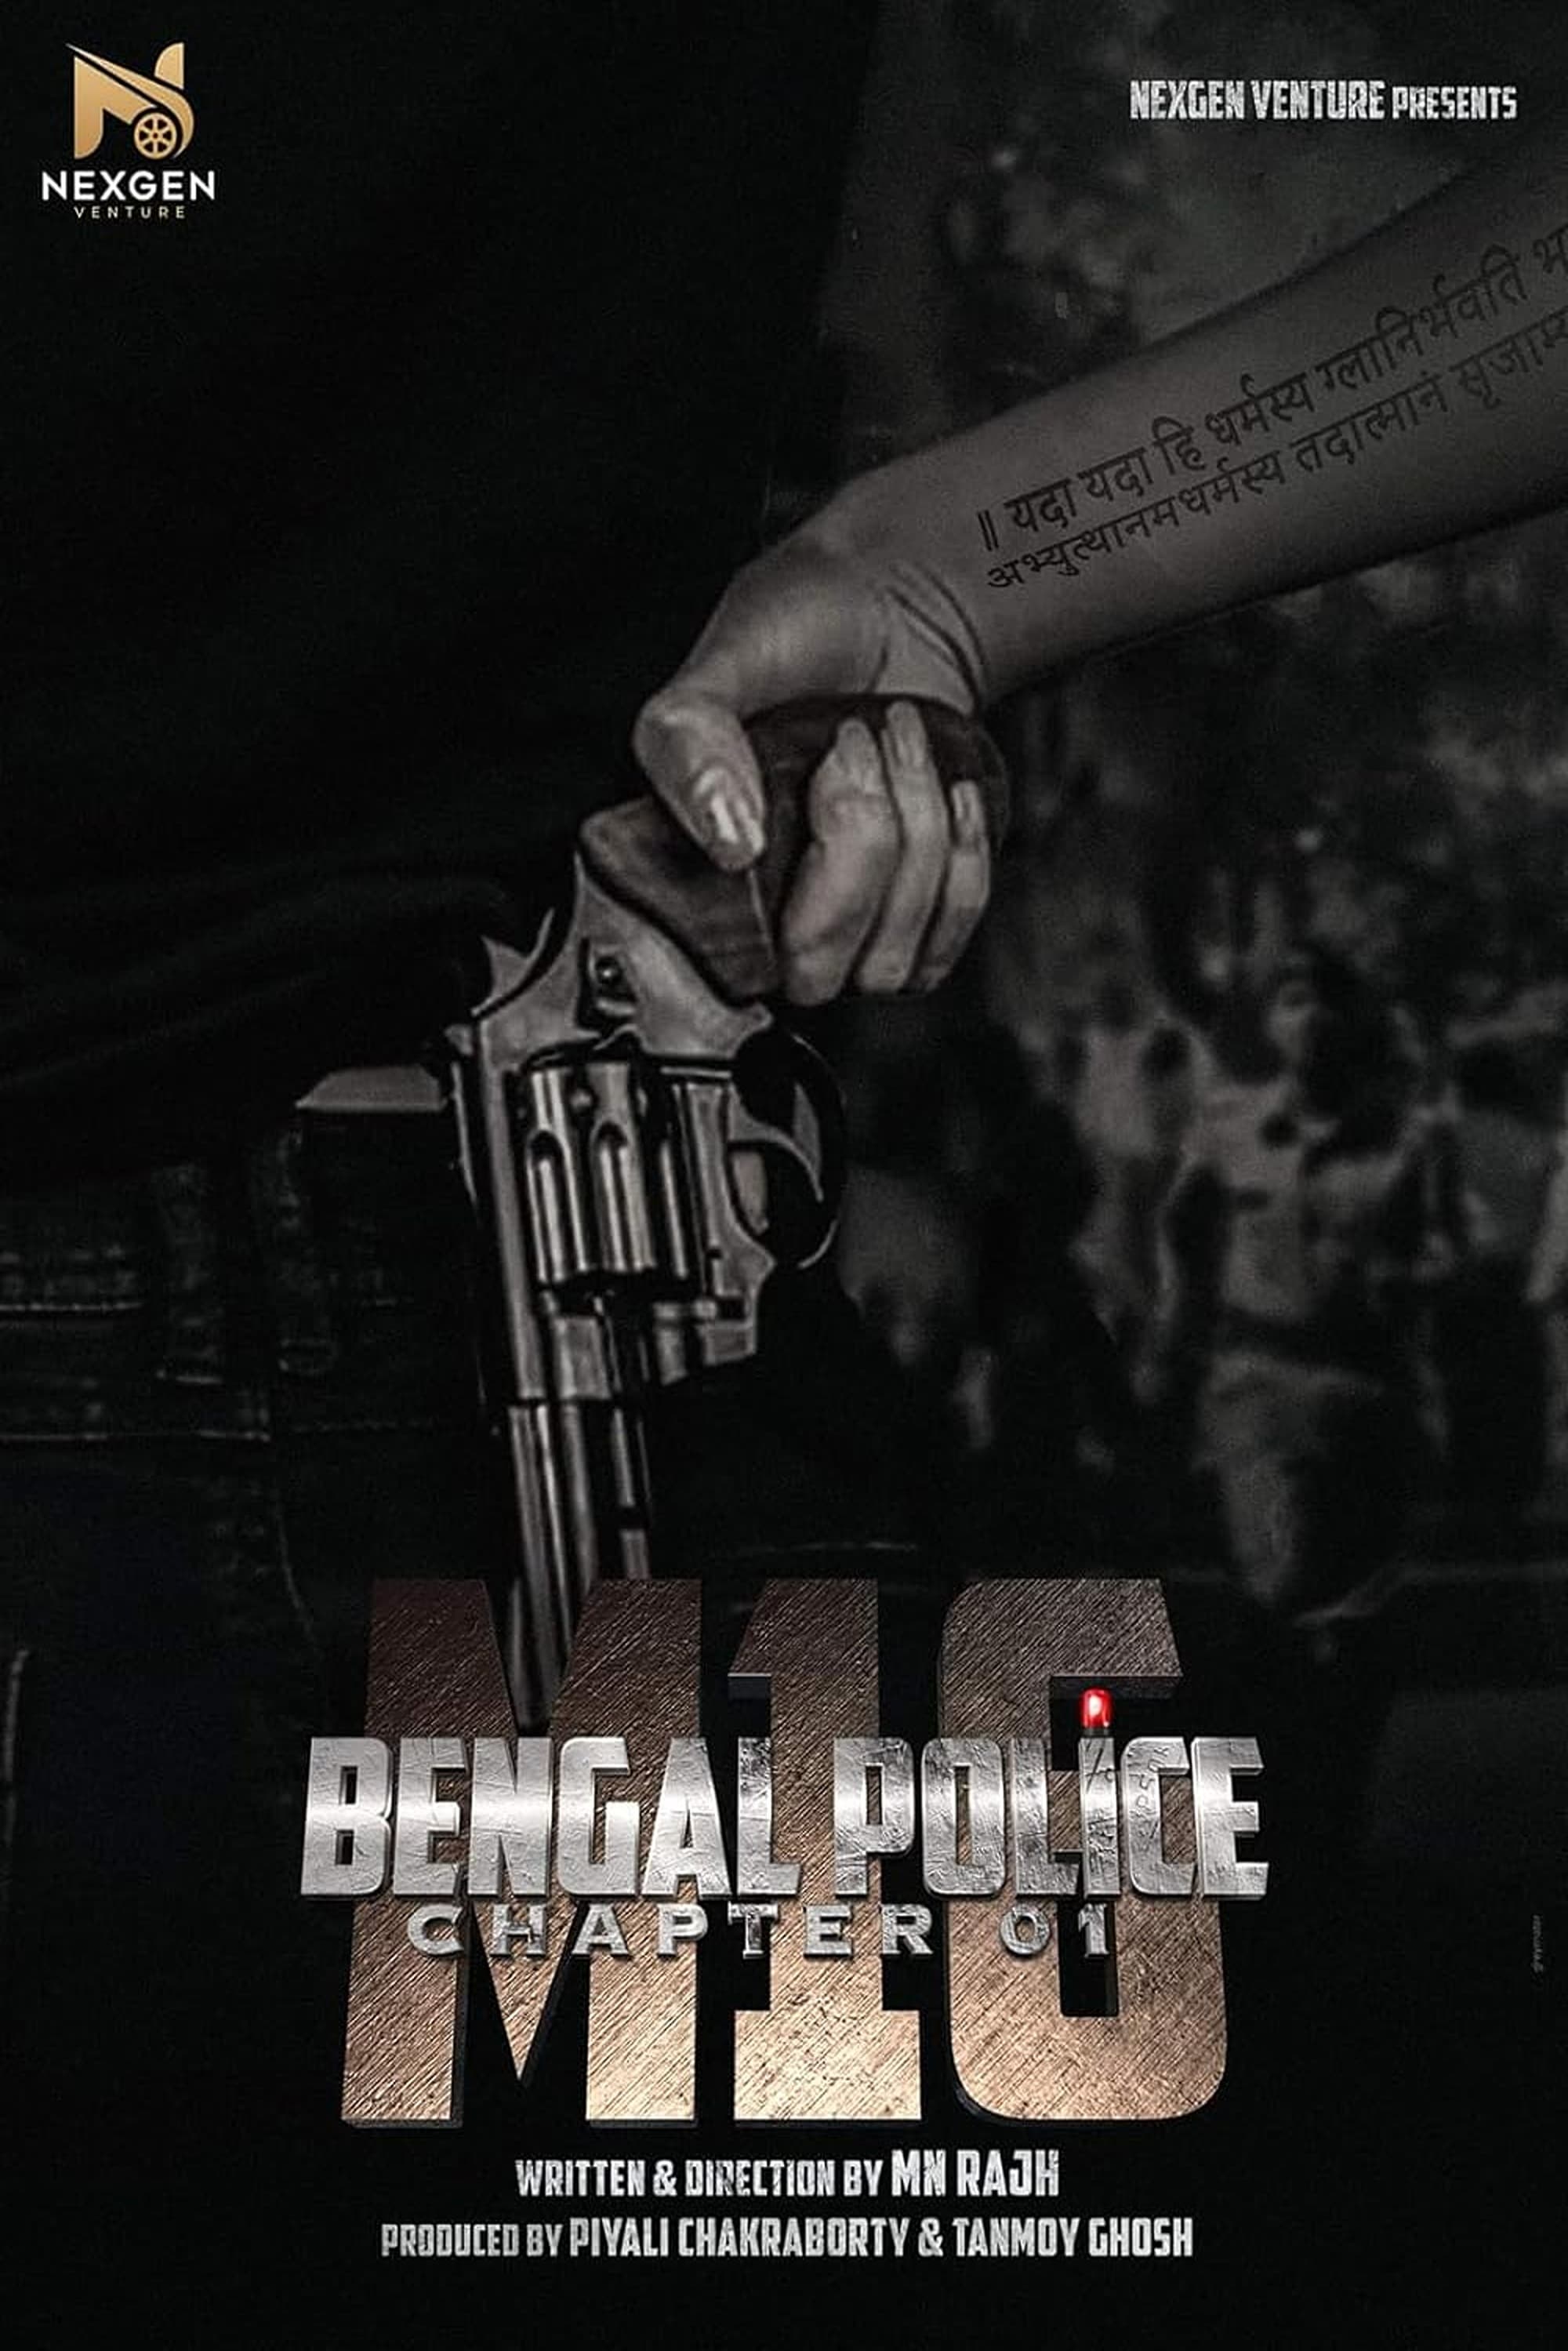 Bengal Police Chapter 01: M16